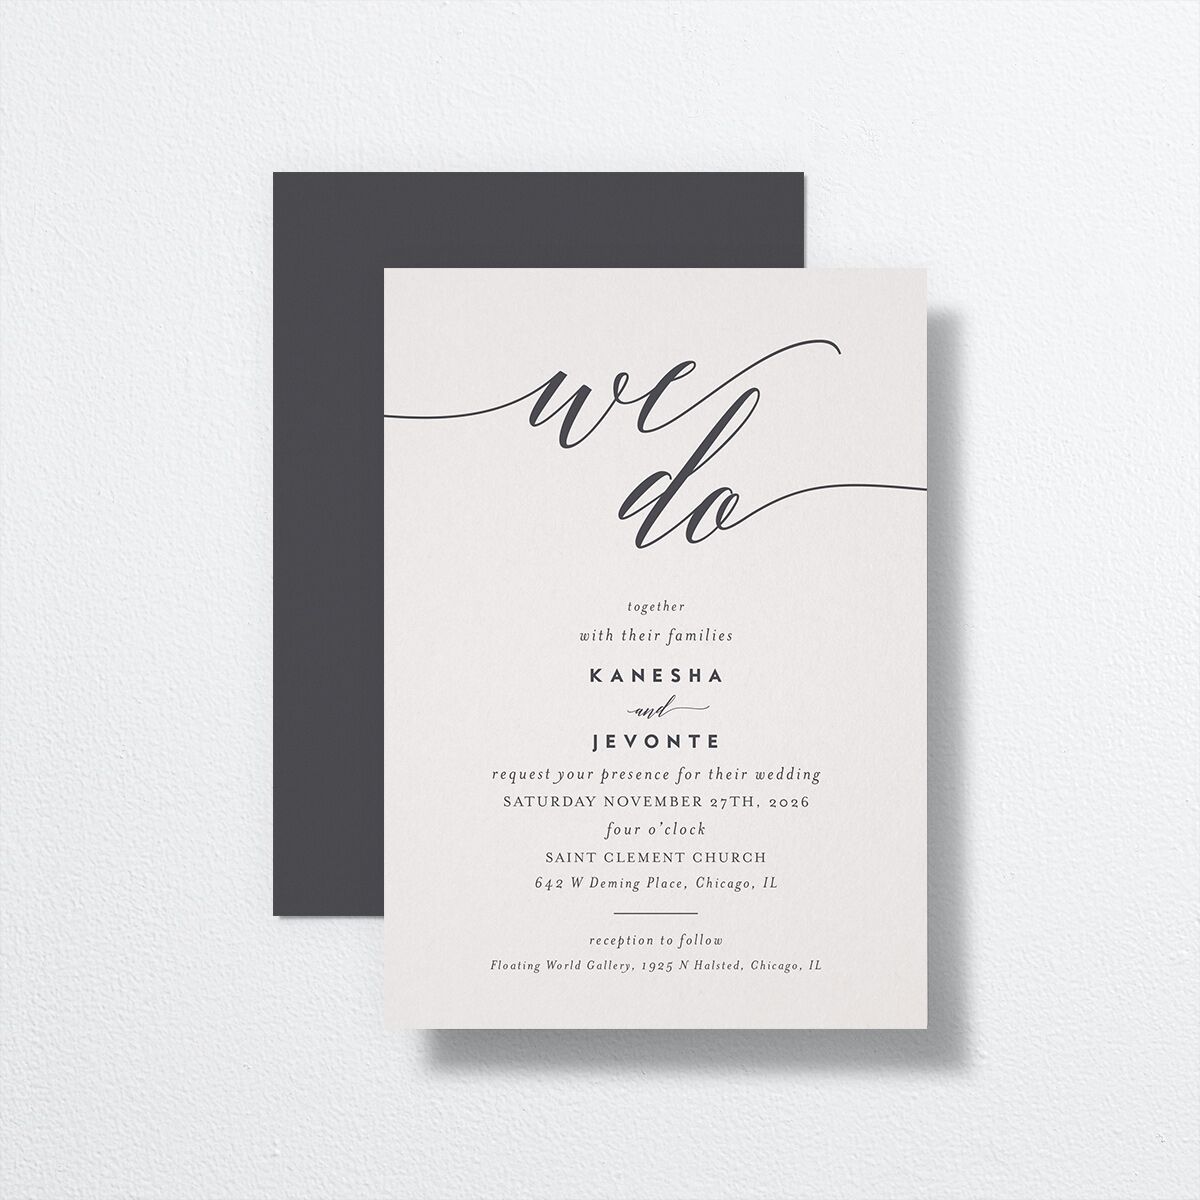 We Do Wedding Invitations front-and-back in grey